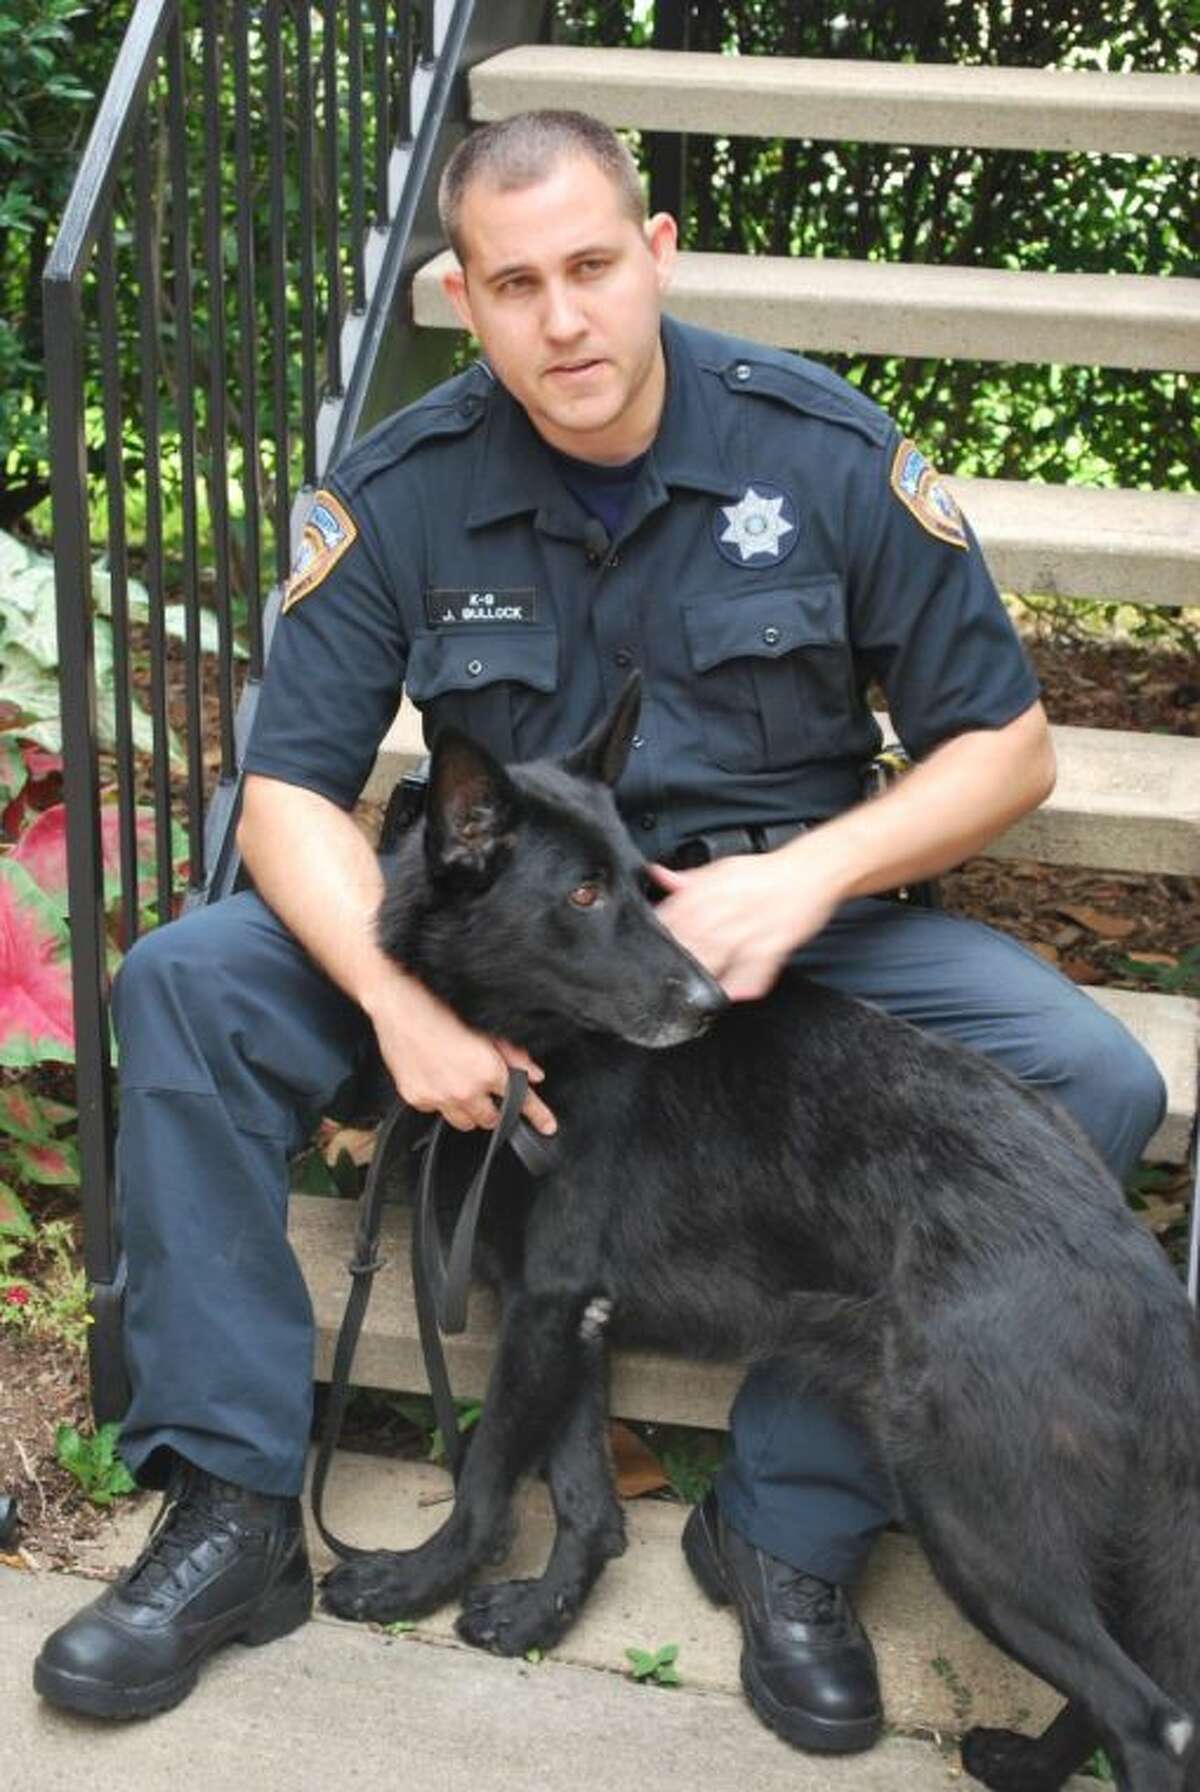 Kingwood residents Harris County Sheriff’s Office K-9 Deputy Tommy, handled by Deputy Jason Bullock, is up for the American Humane Association’s Hero Dog Award in the Law Enforcement/Arson Dogs category. They need the public’s help to win the award through voting on this website http://www.harriscountyso.org/community_engagement.aspx daily. If they win, prize money will go toward K9s4Cops as their charity recipient.